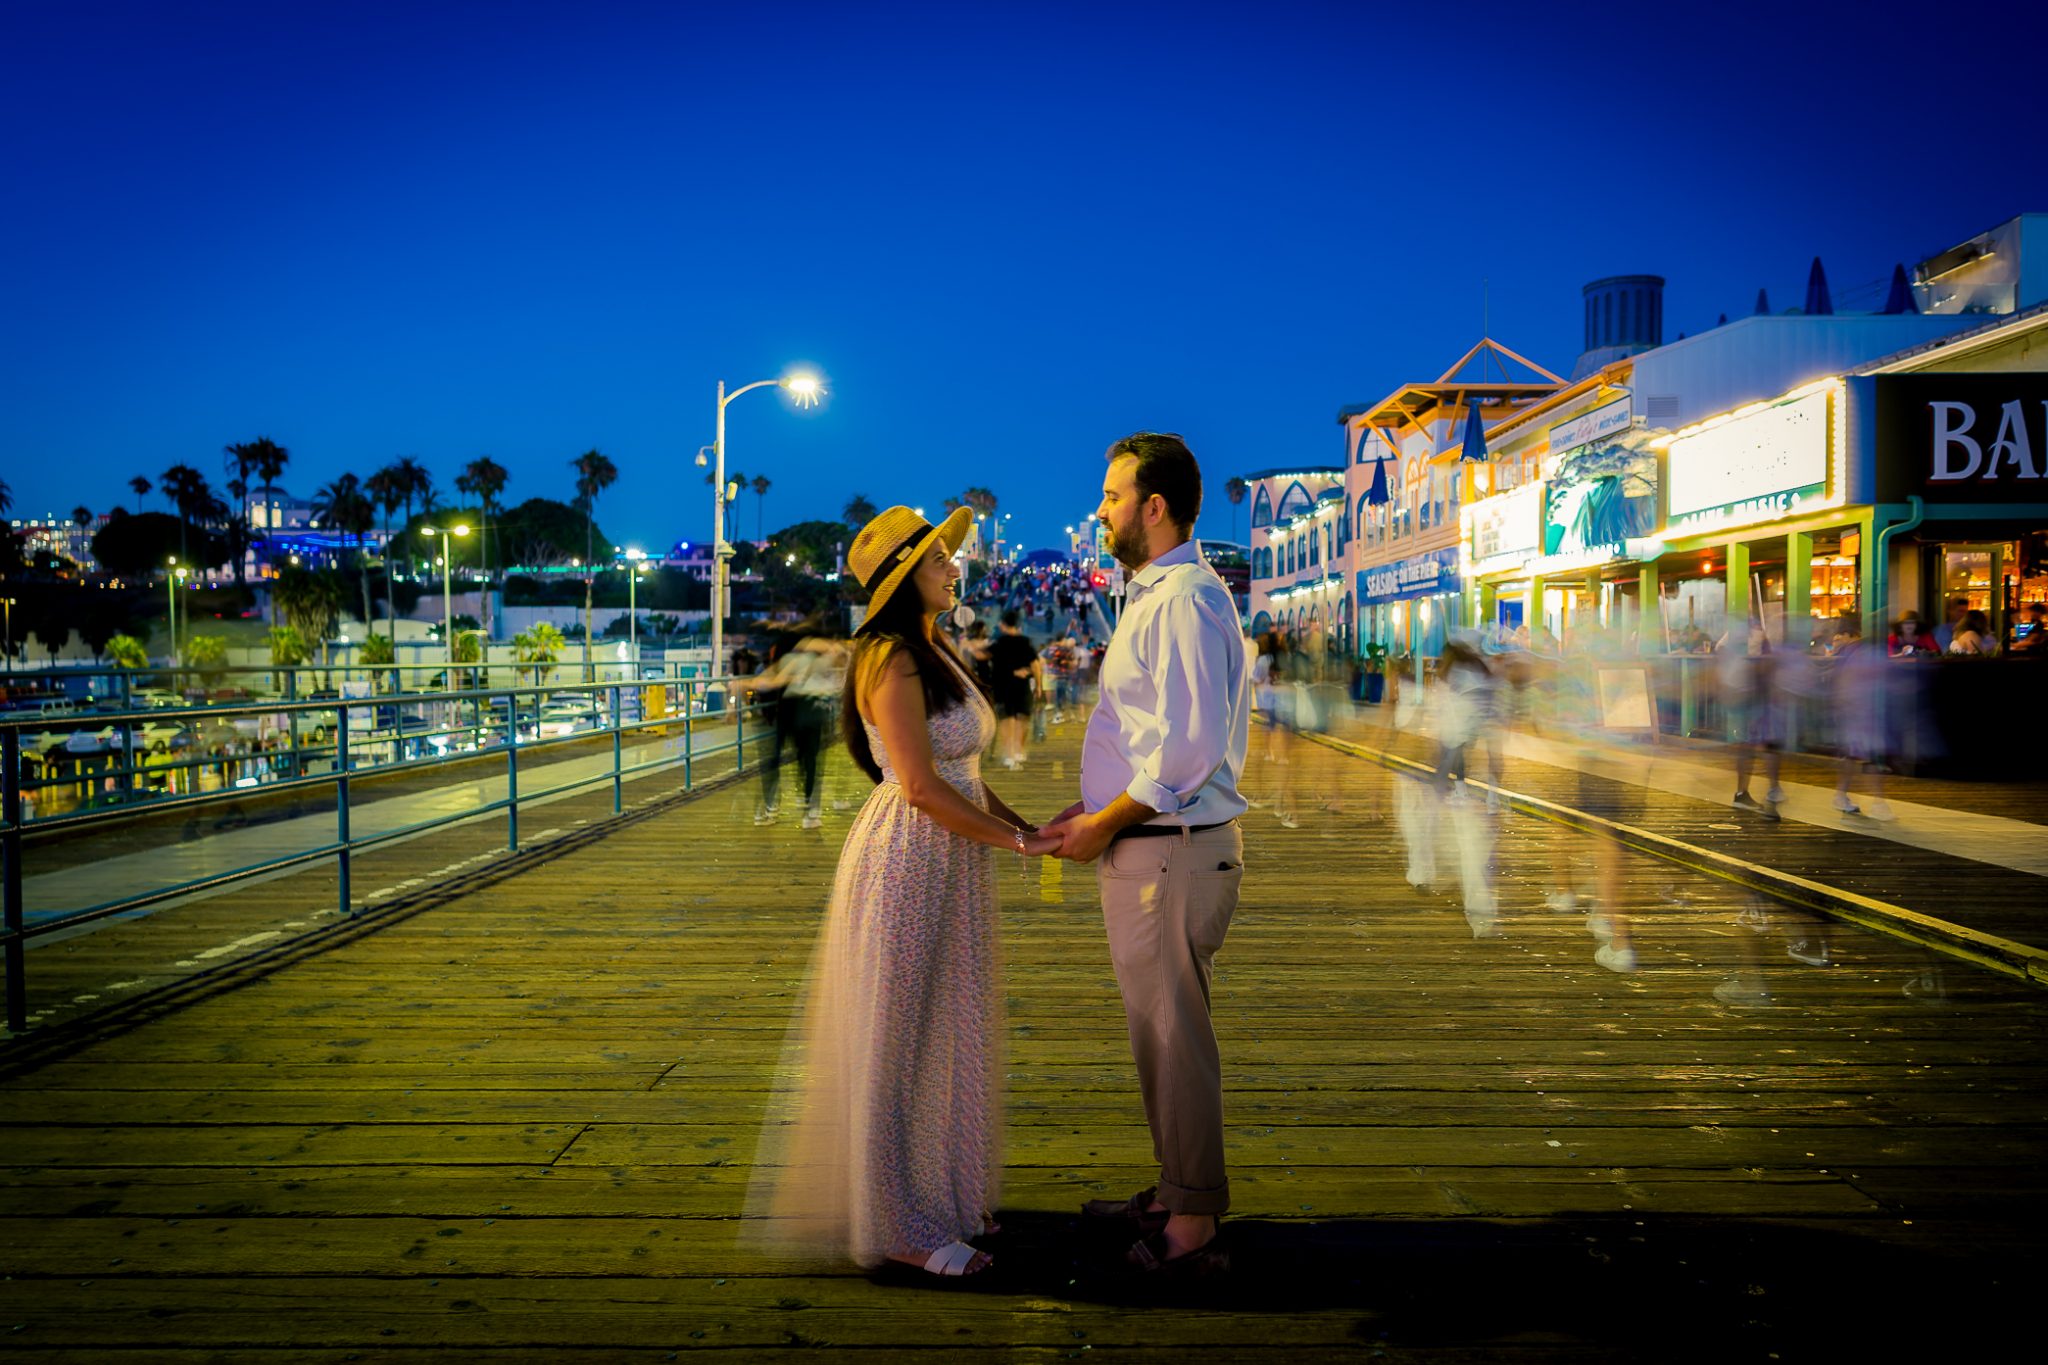 ThomasKim_photography A wedding couple standing on a pier at night.